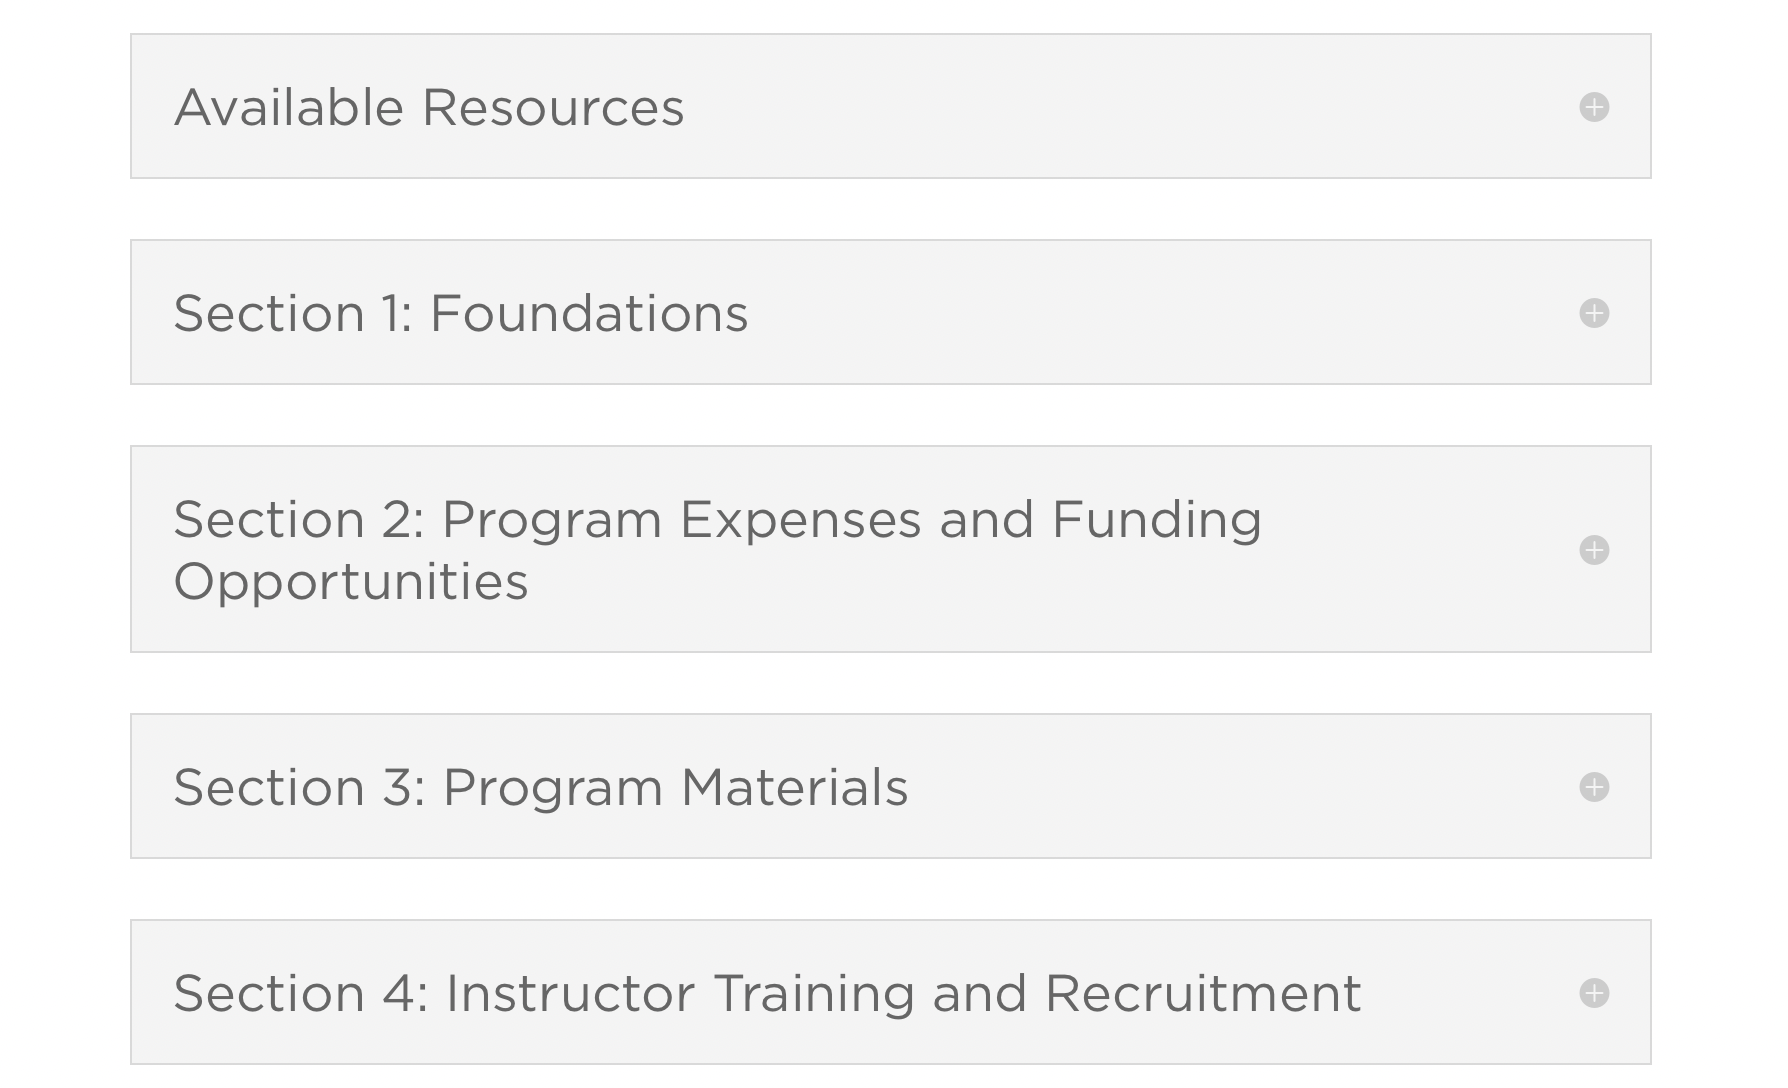 A screenshot of the drop down menus available on the resource hub, including available resources, foundations, program expenses and funding opportunities, program materials, and instructor training and recruitment.